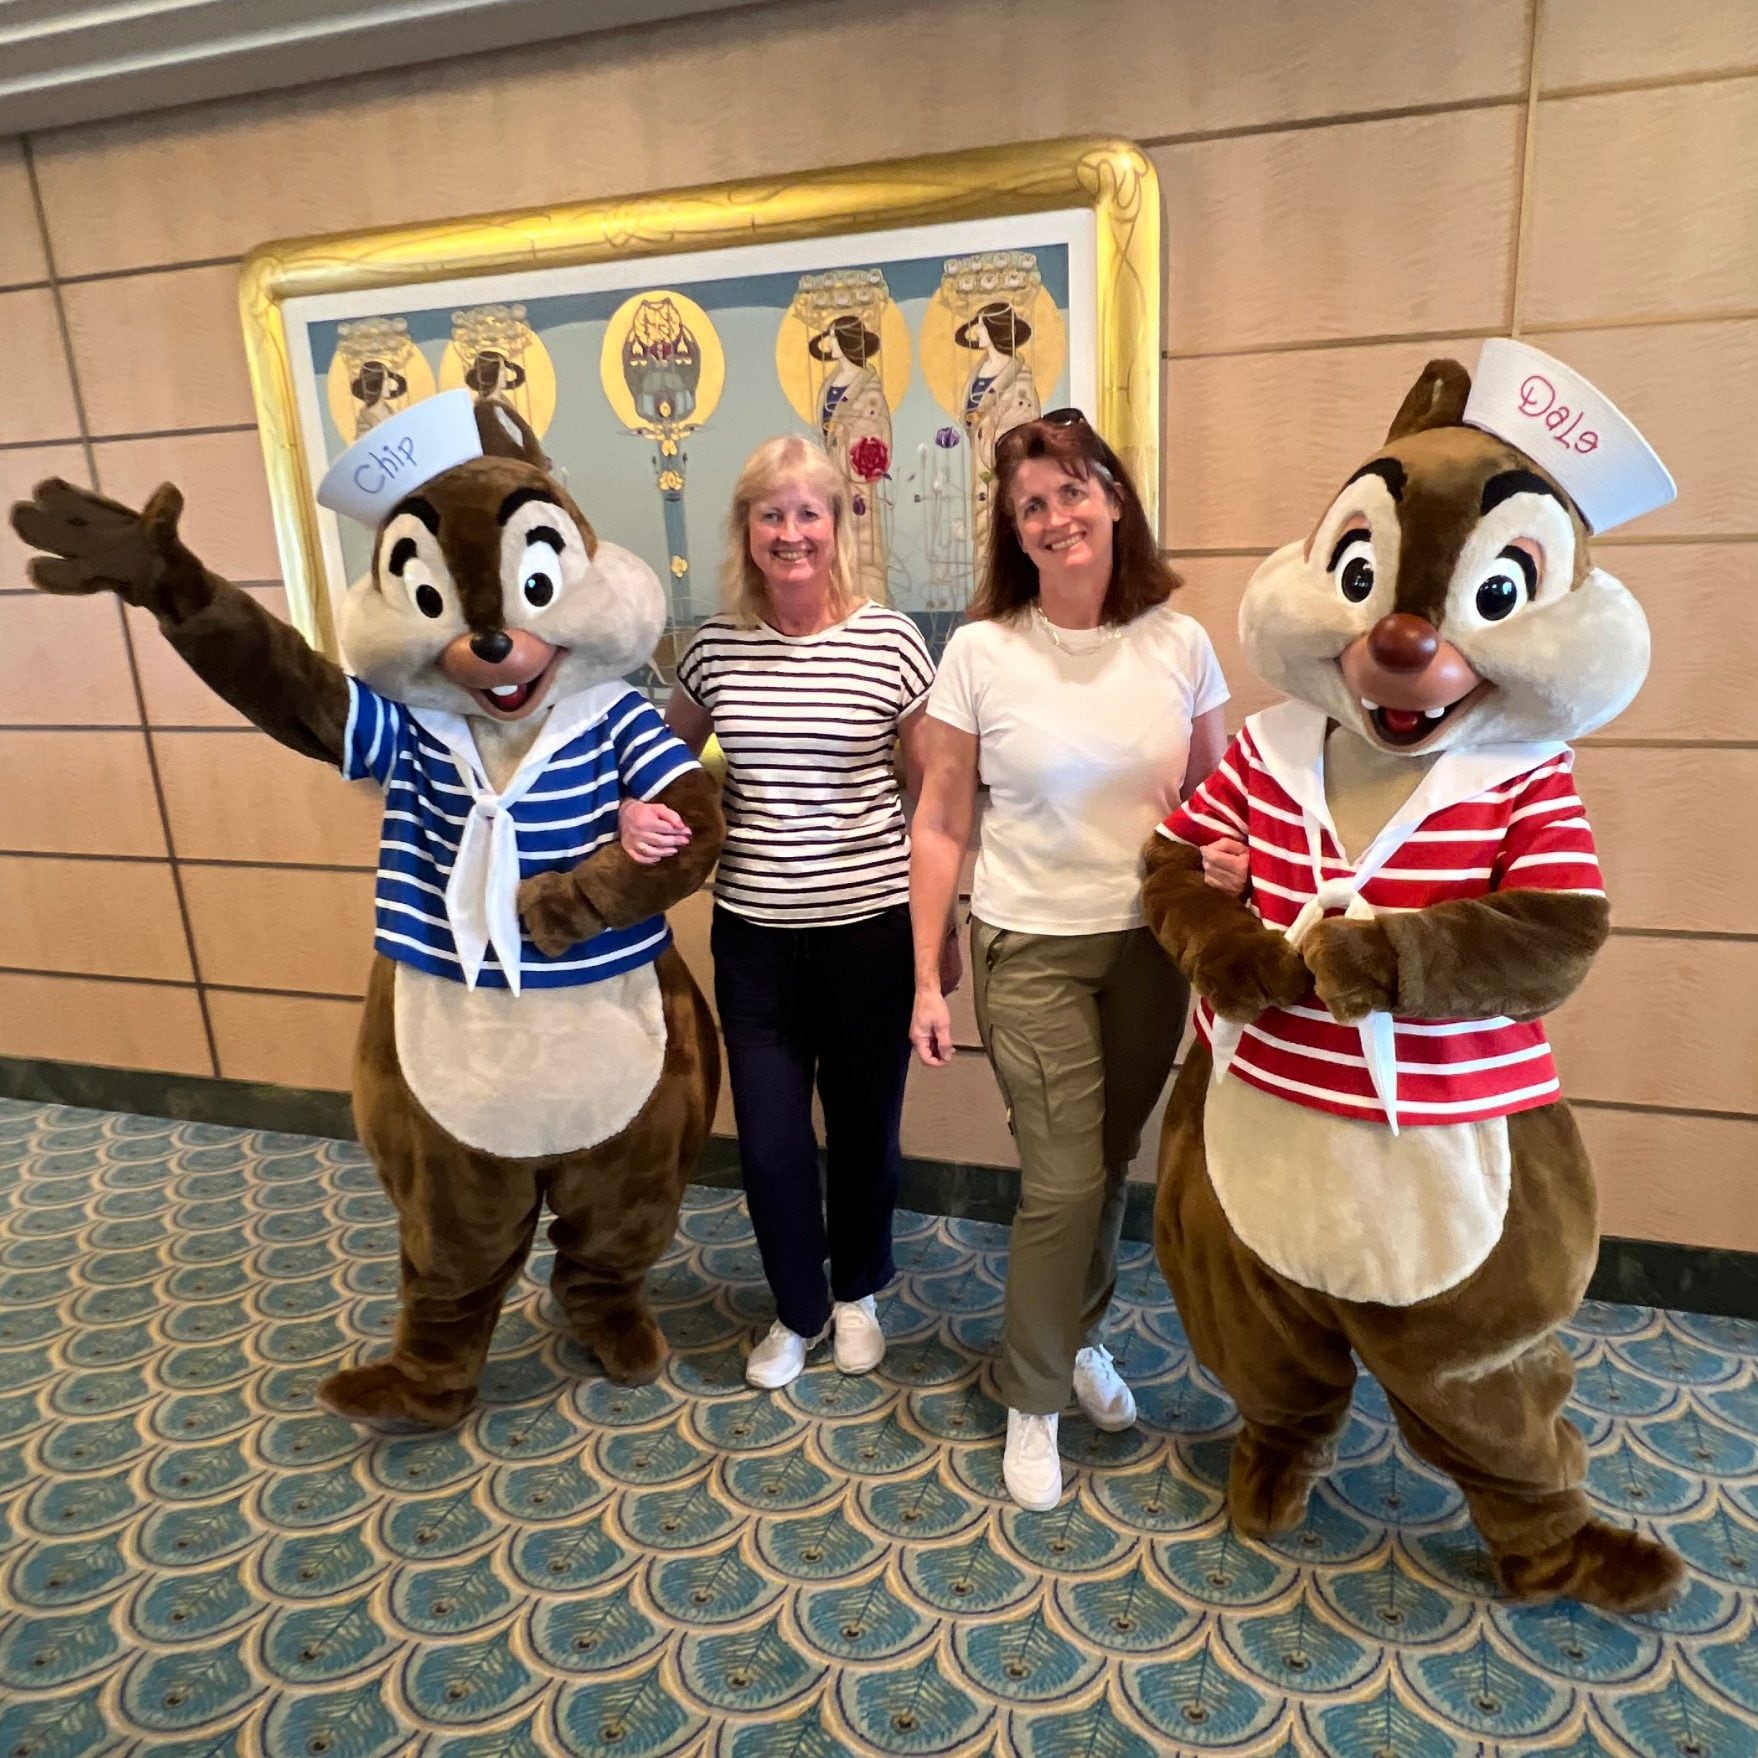 i went on a disney cruise without children – this is what happened